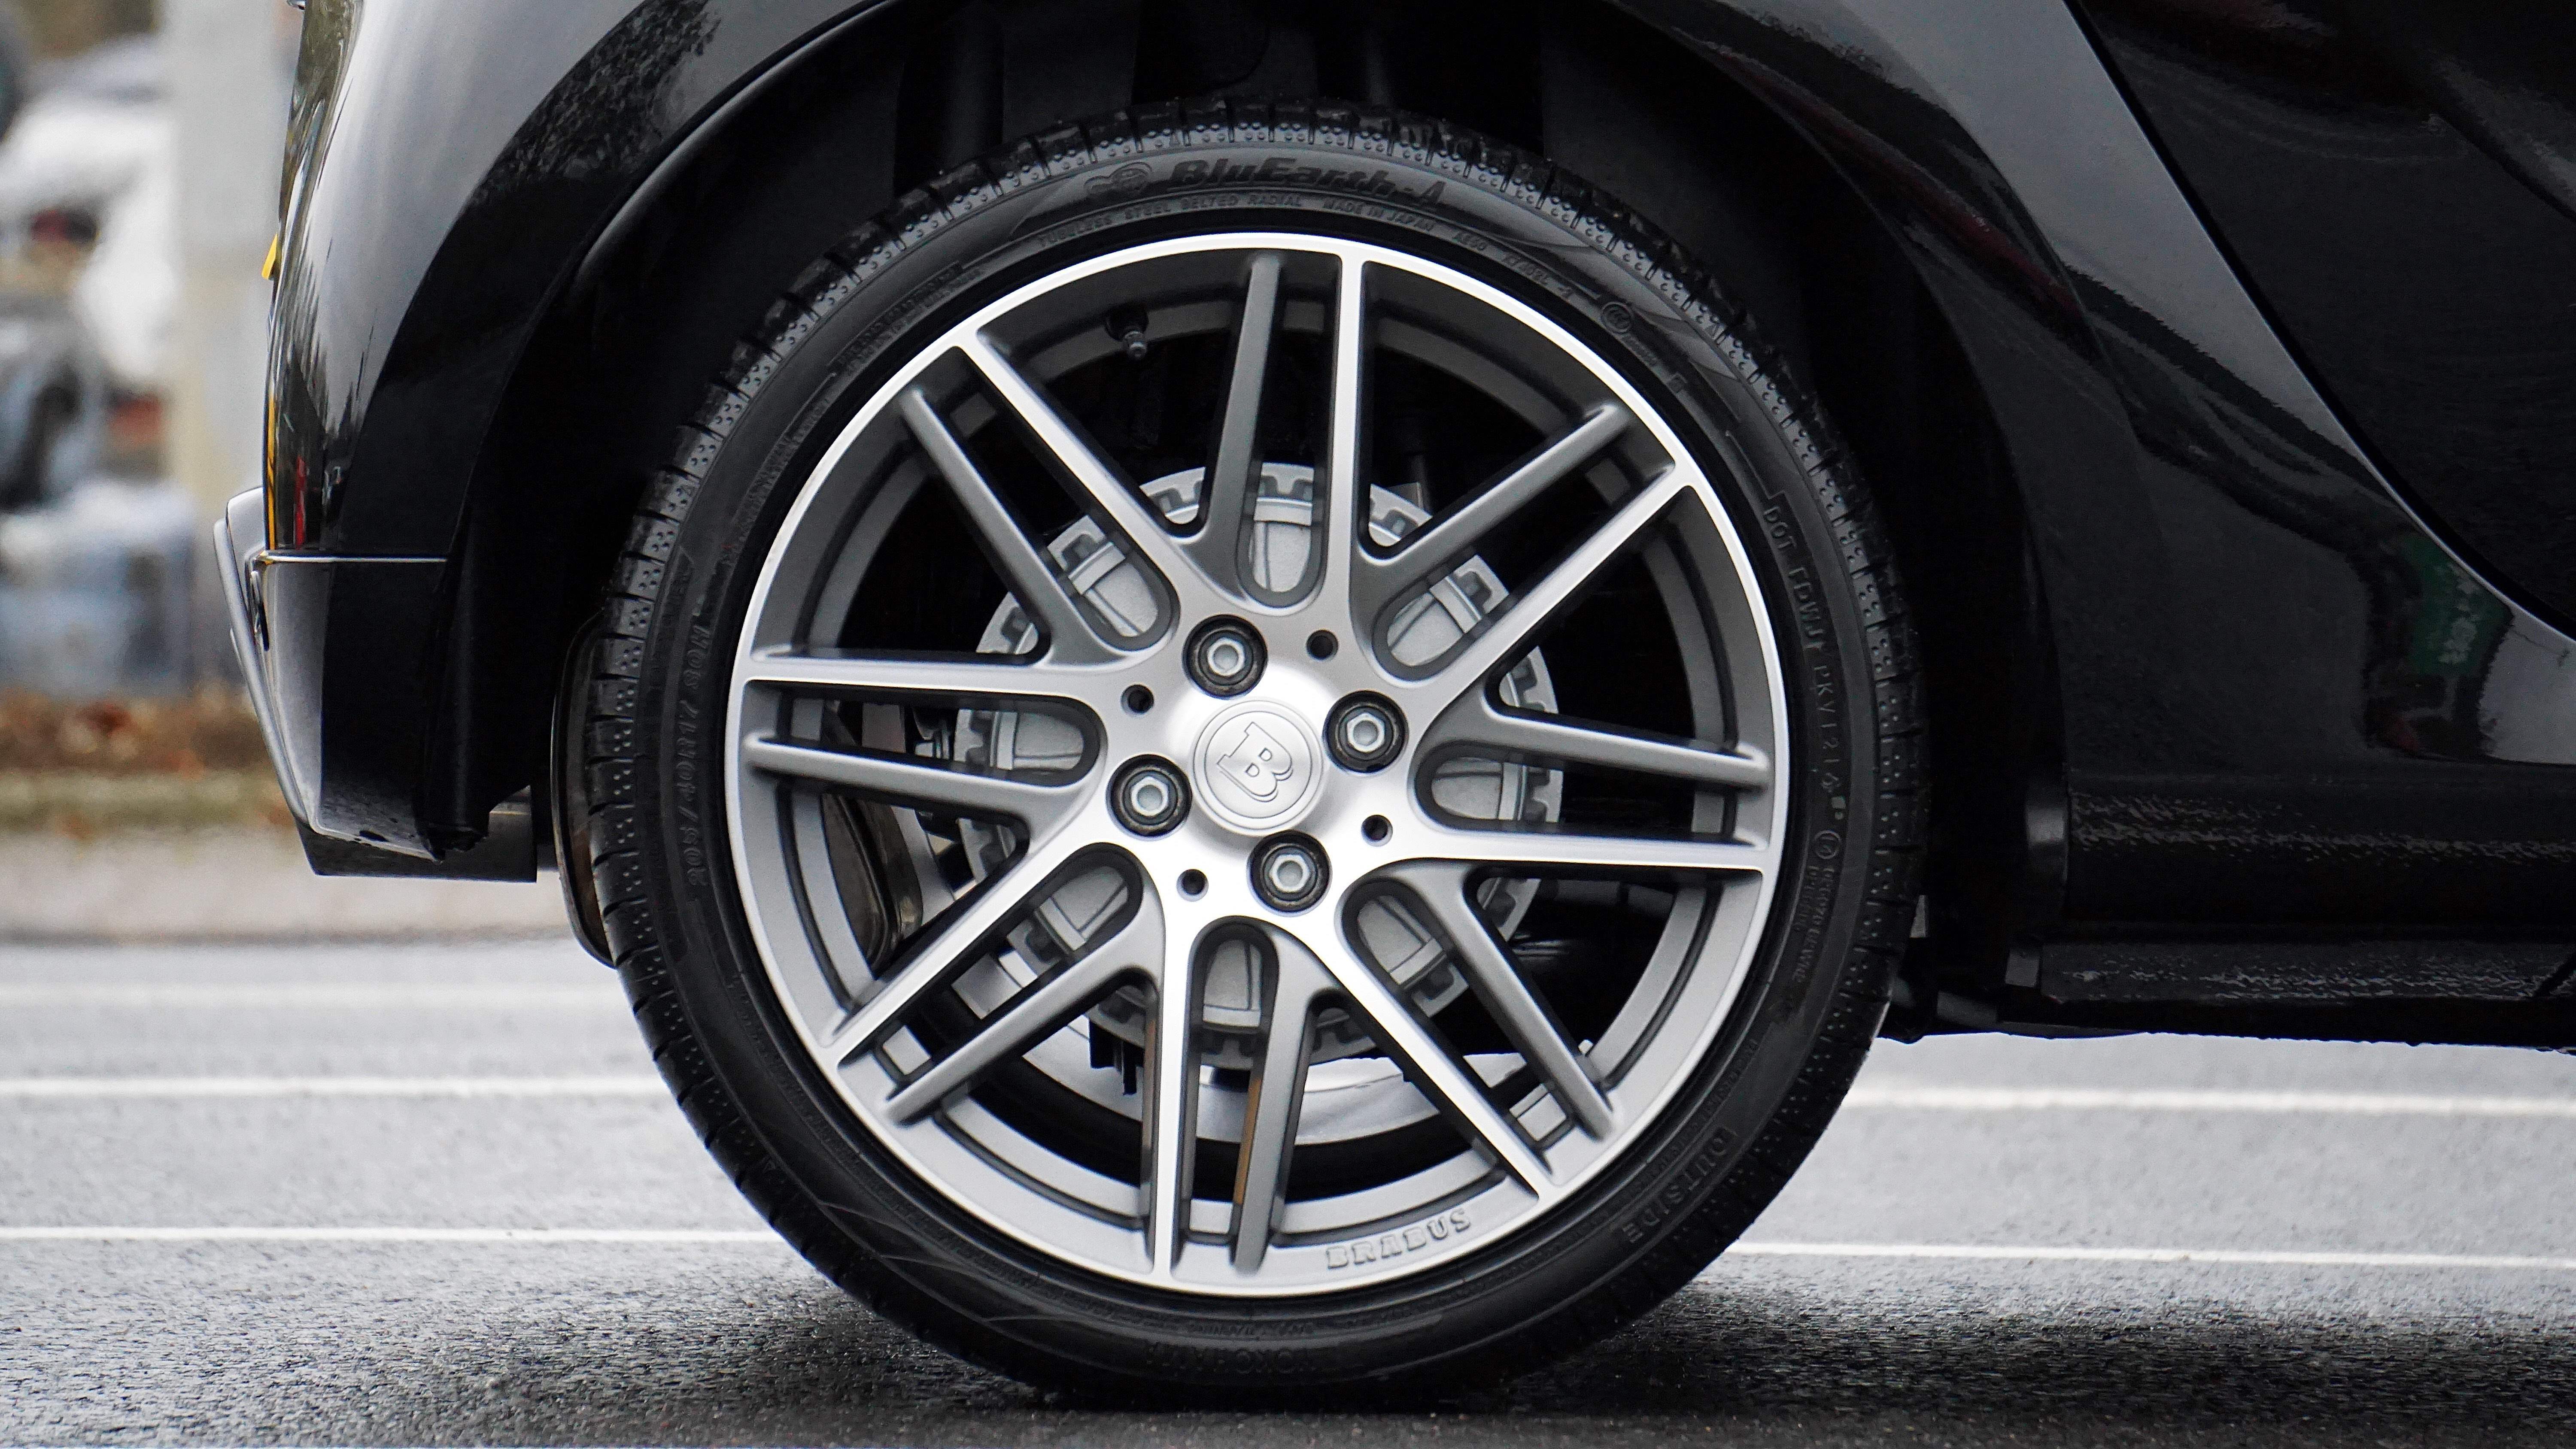 When objects or moisture is trapped in the tire during the curing process, it can cause tread or belt separations, which can lead to blowouts and accidents.